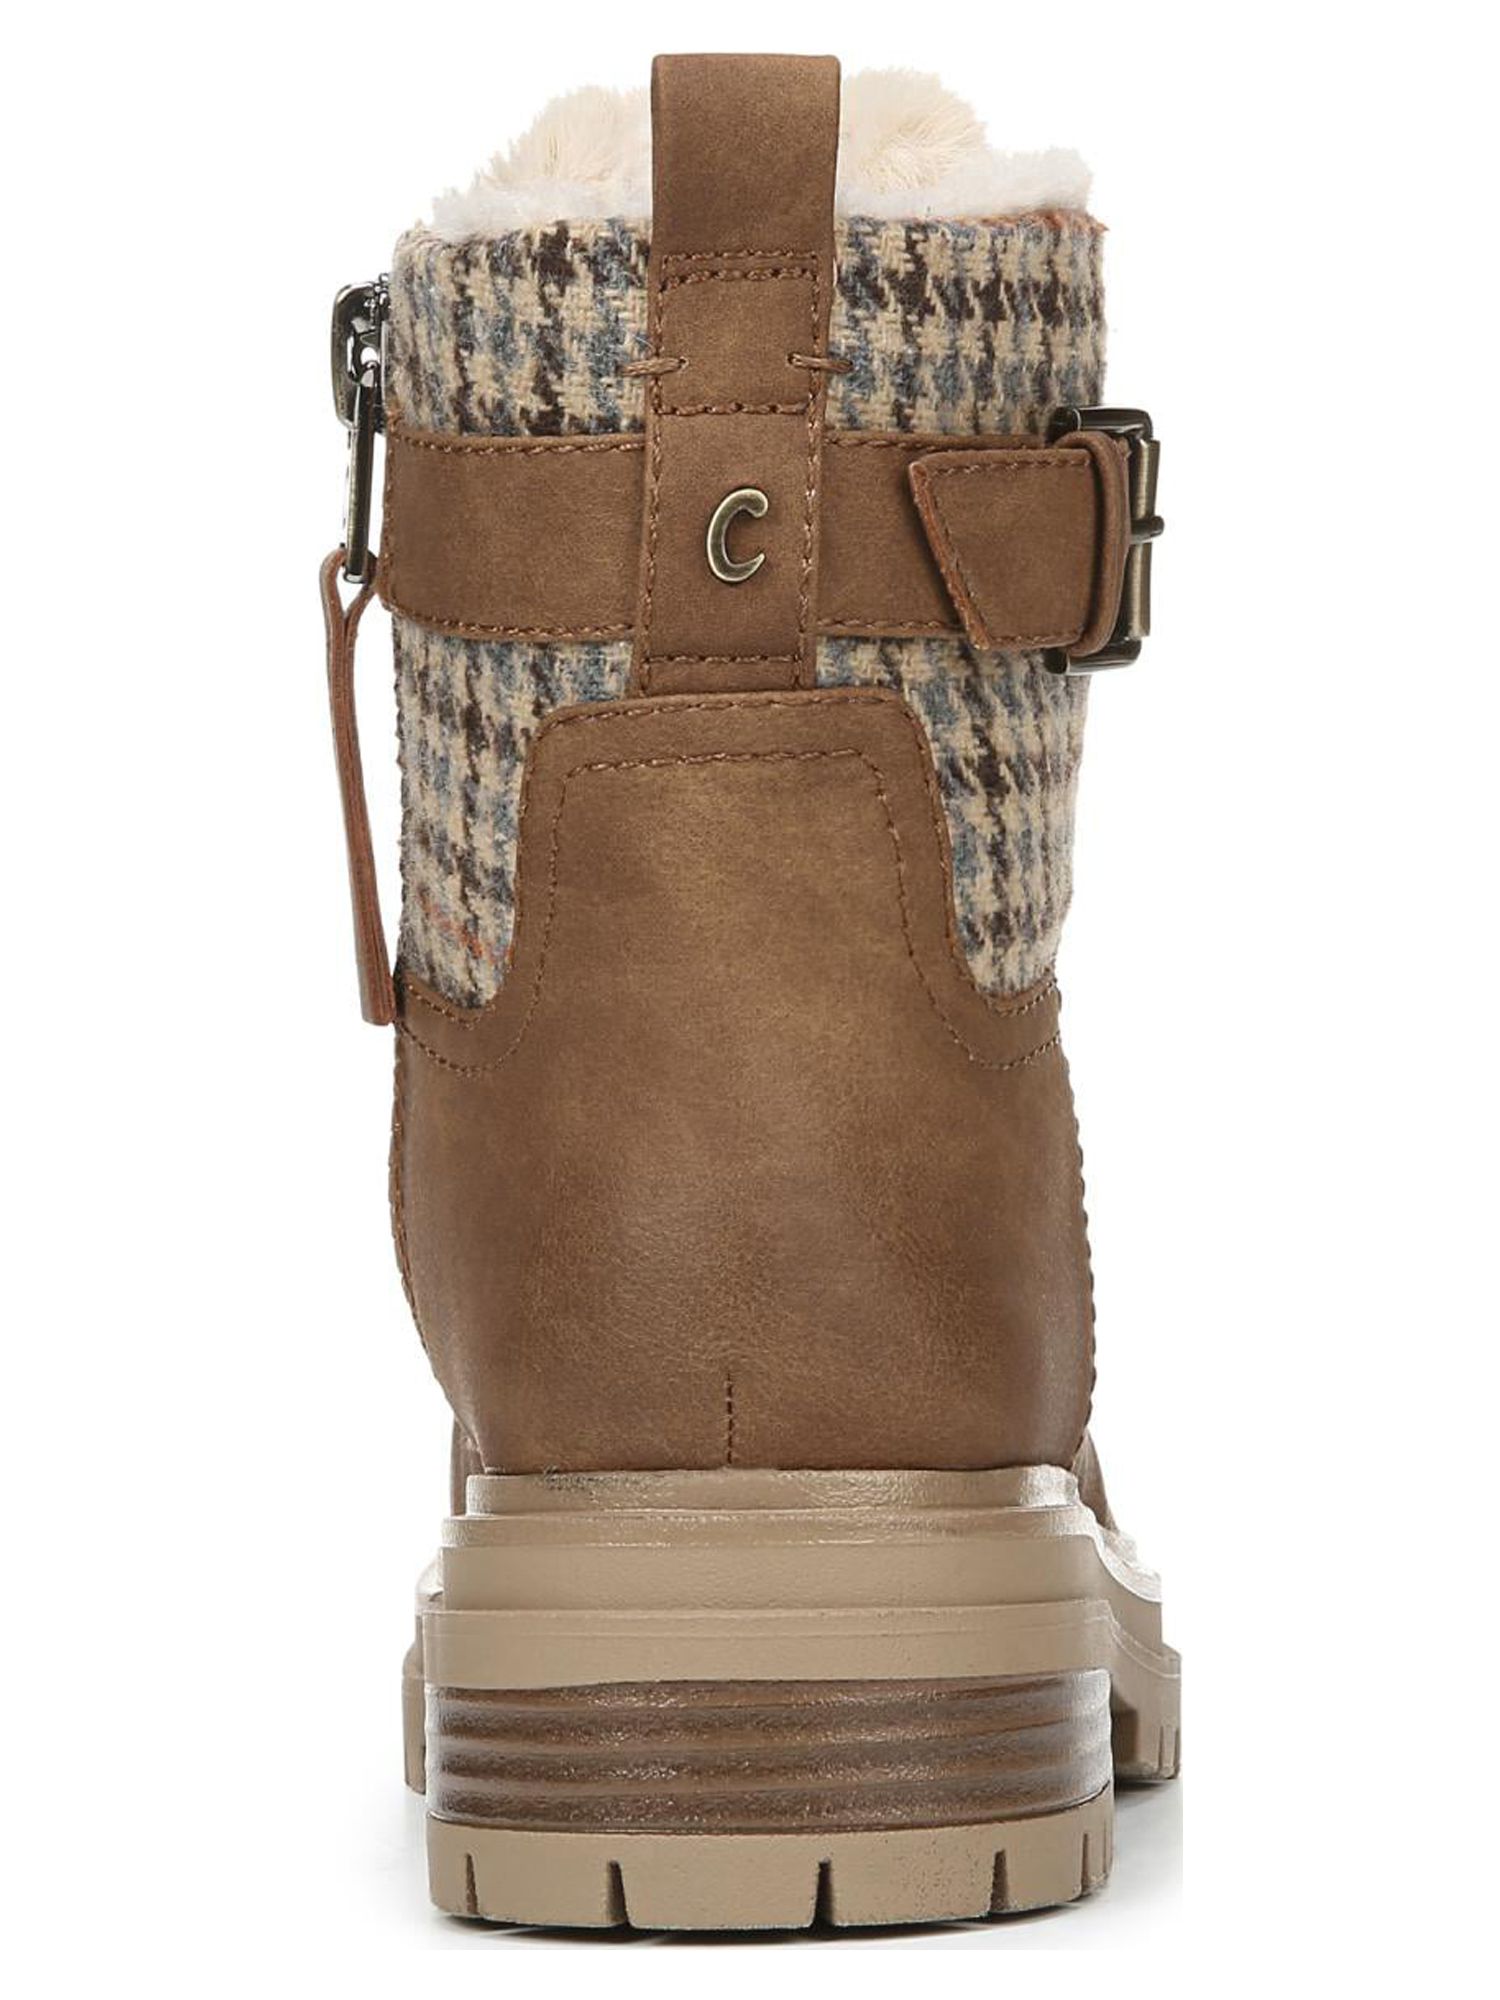 Circus by Sam Edelman Women's Gretchen Shearling Hiker Boot - image 4 of 8